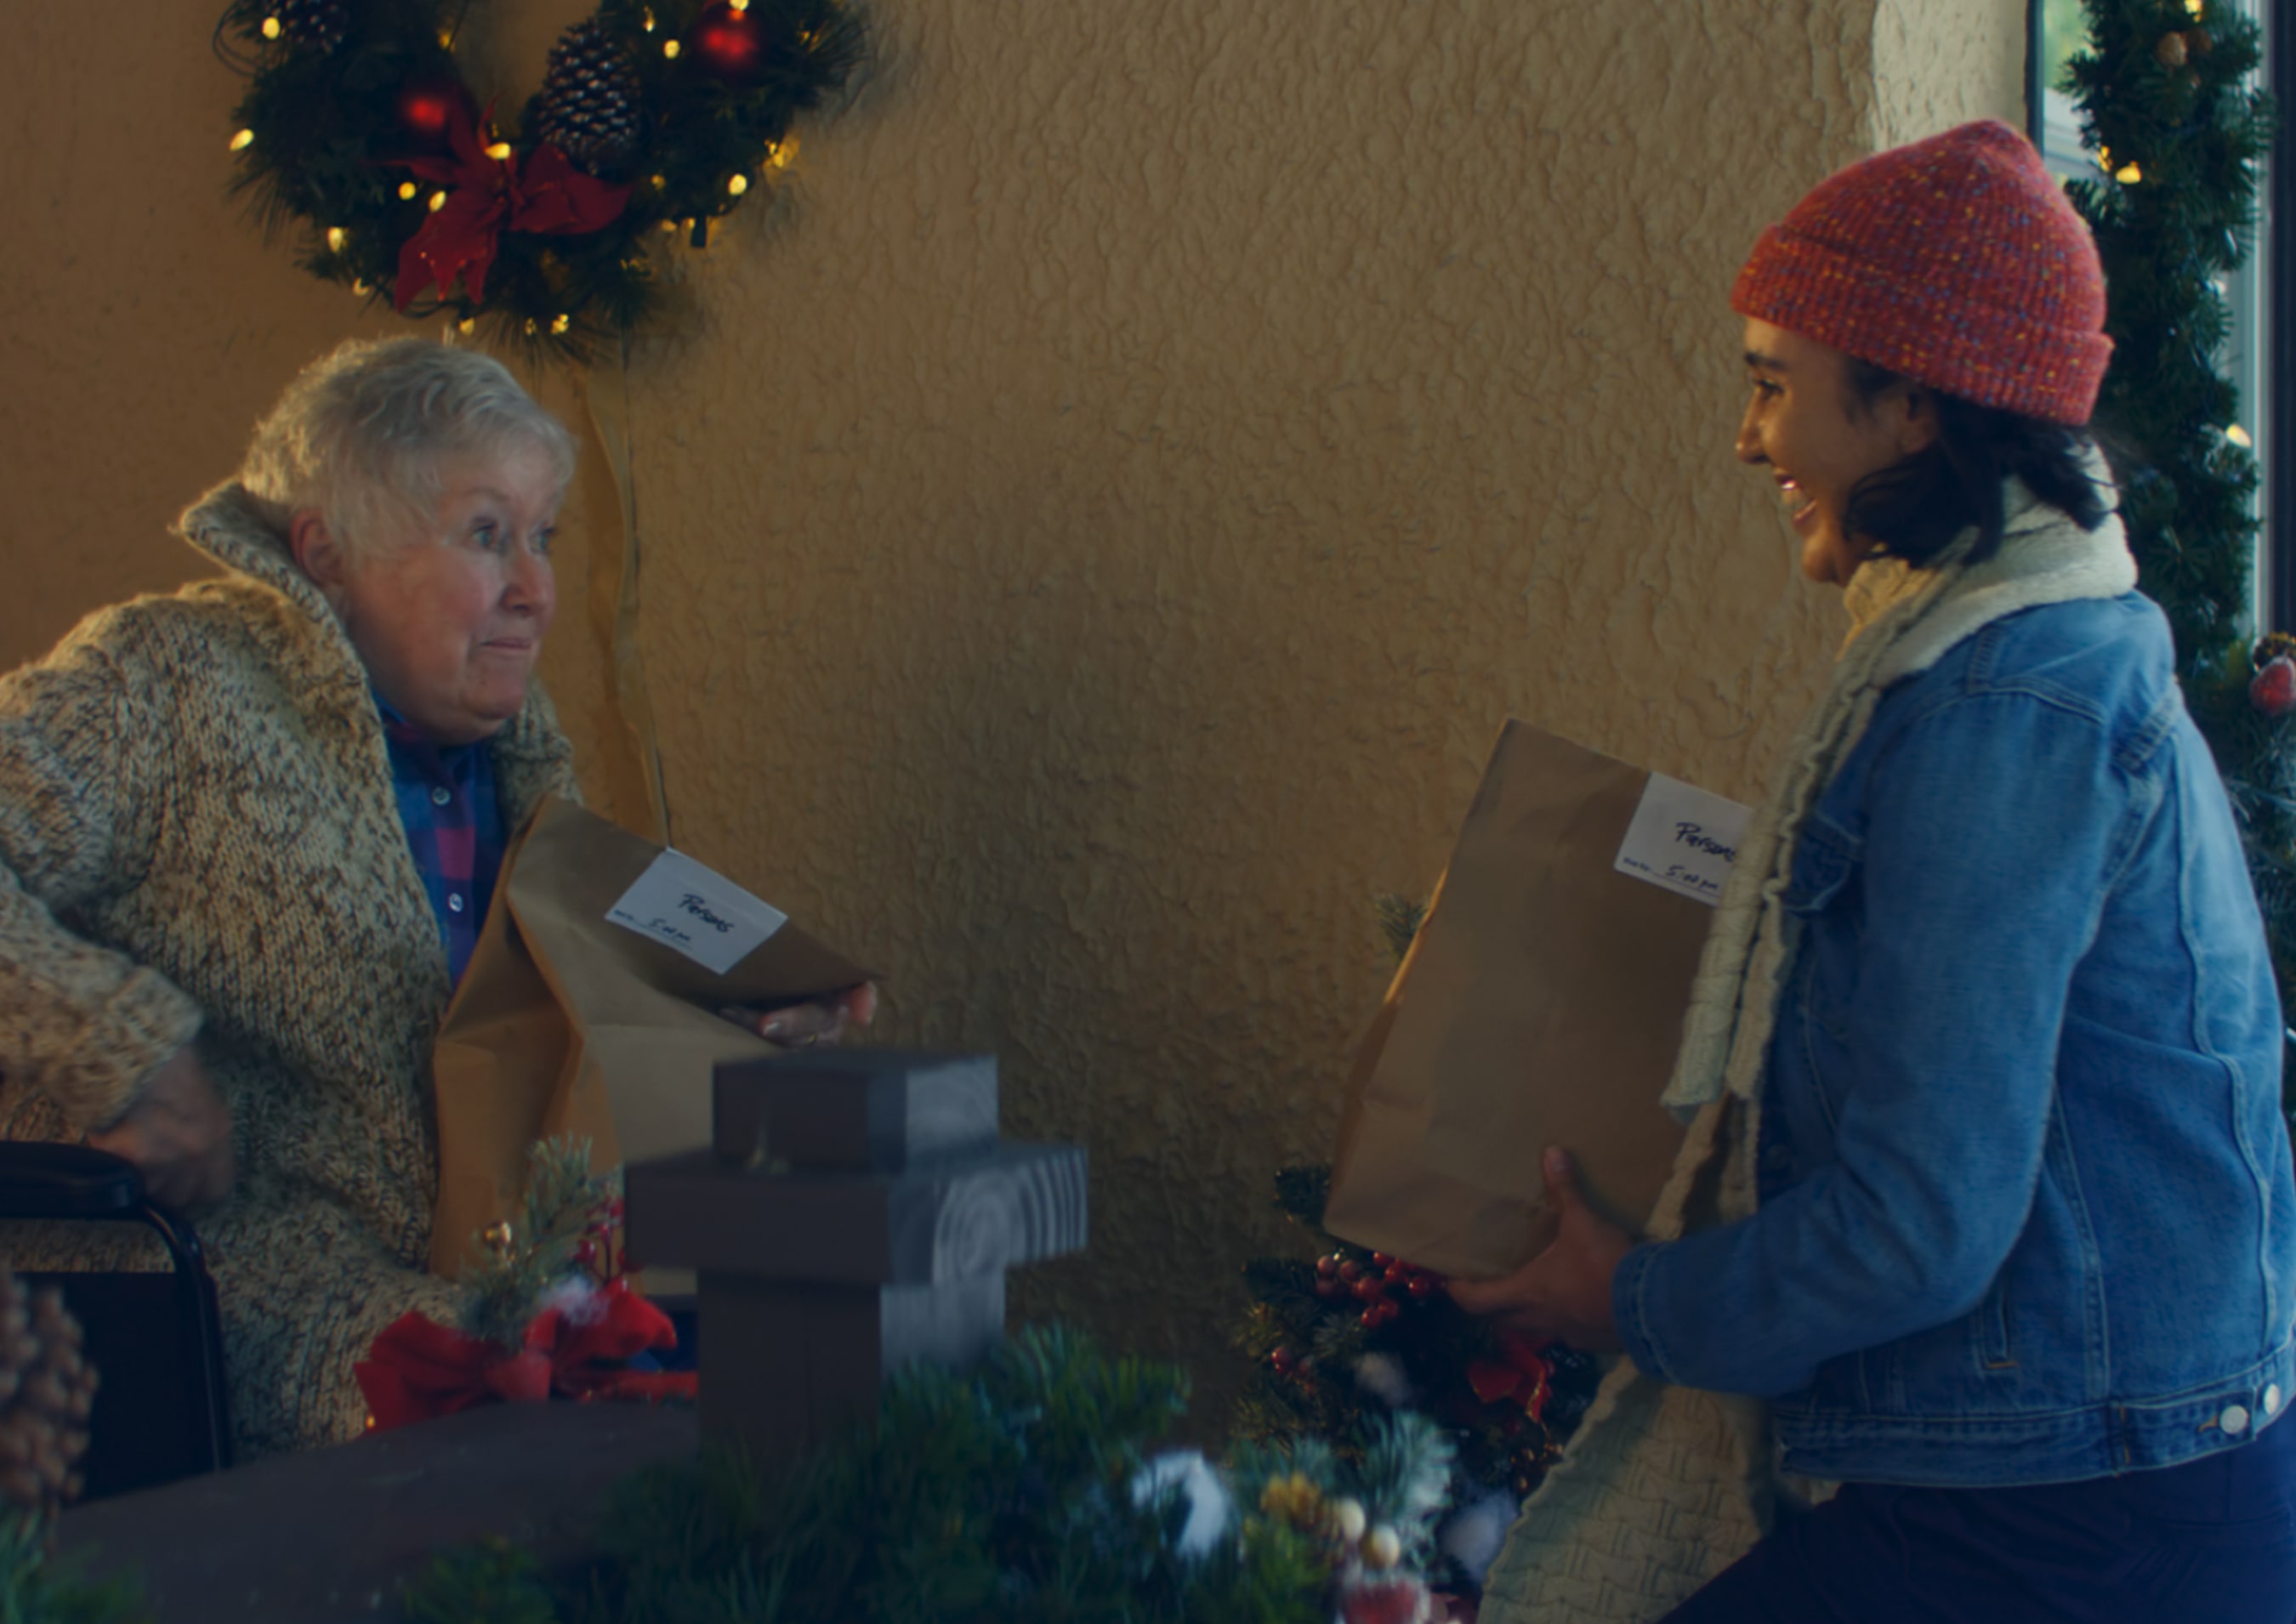 Toyota’s new spot “Like No One’s Watching” shares a touching holiday message about selfless acts of kindness.